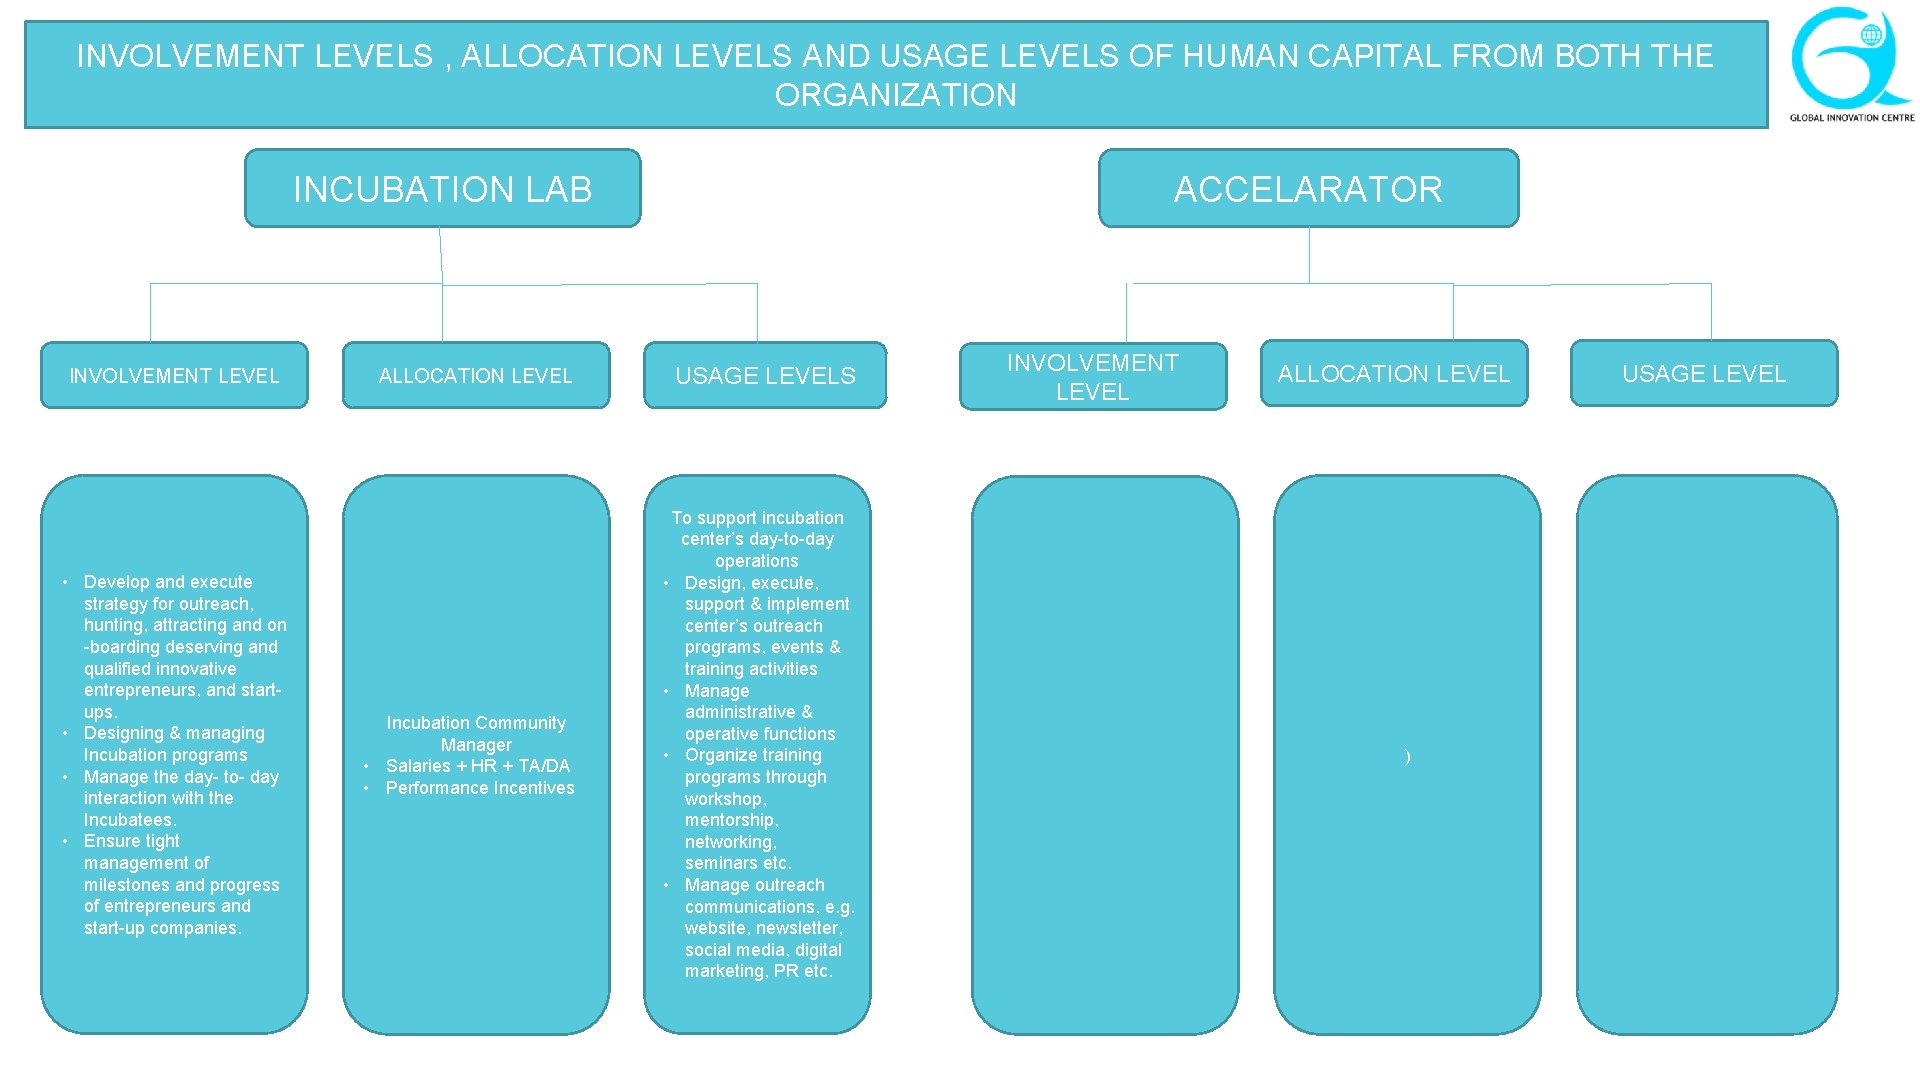 INVOLVEMENT LEVELS , ALLOCATION LEVELS AND USAGE LEVELS OF HUMAN CAPITAL FROM BOTH THE